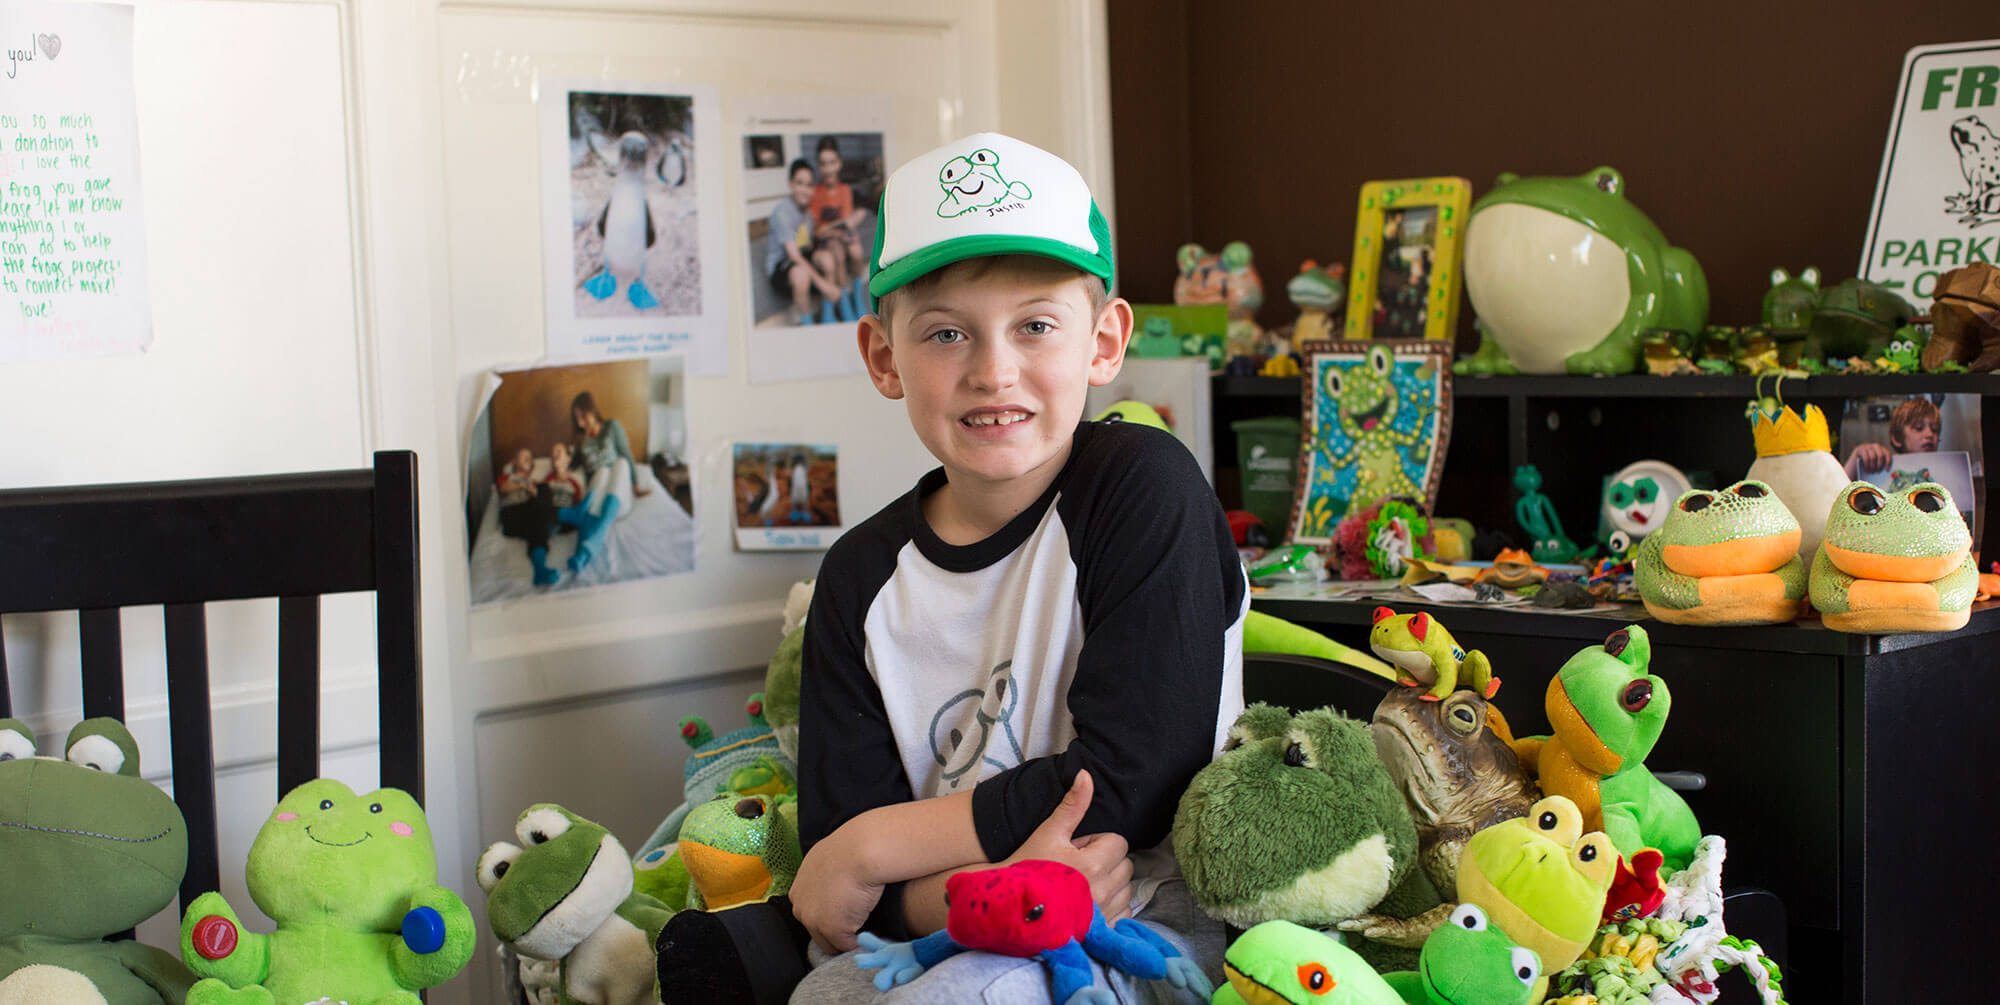 Image of a little boy sitting with stuffed animal frogs